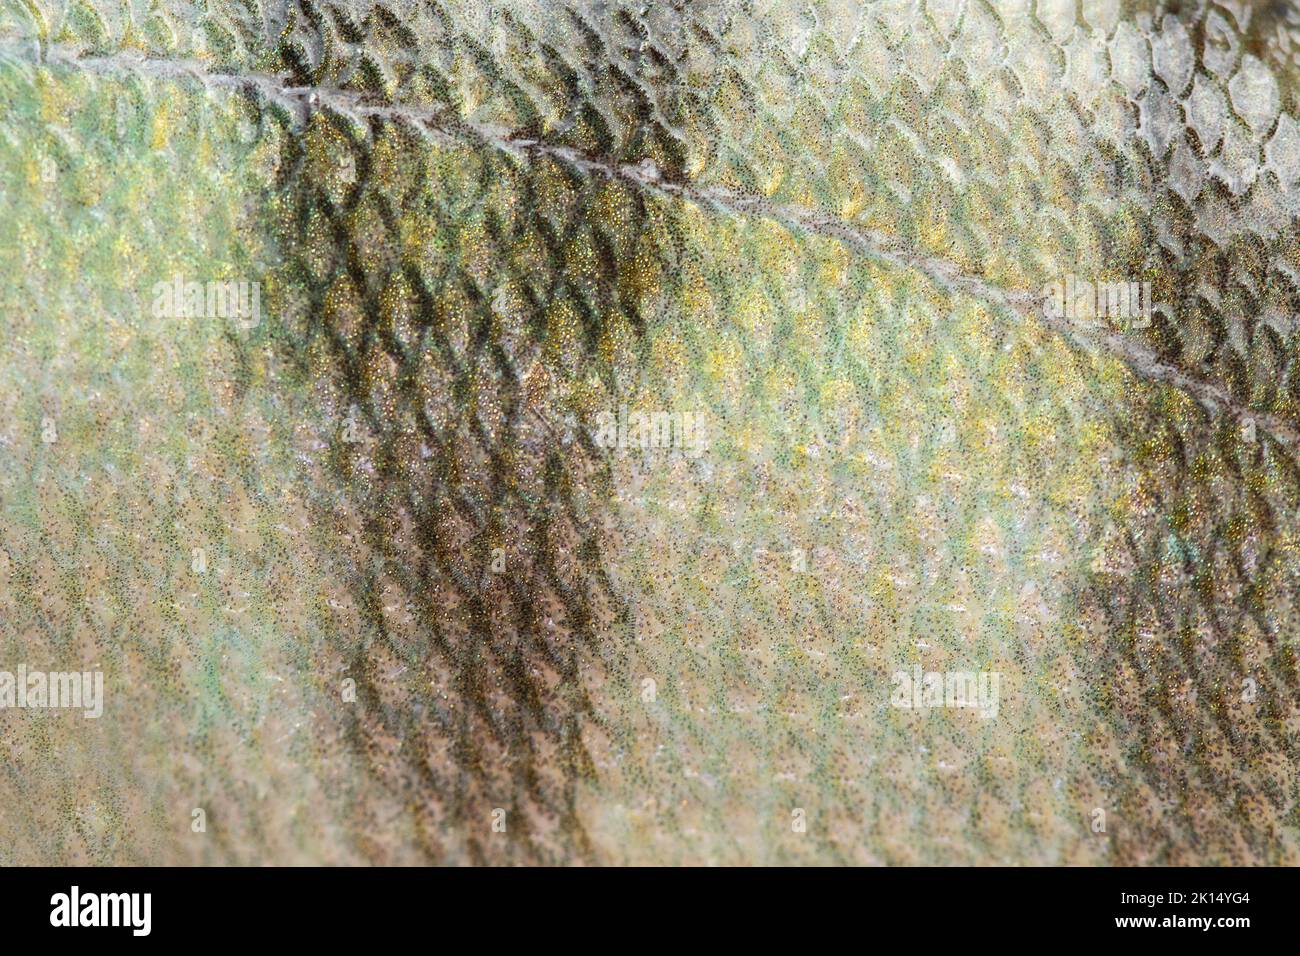 Macro view wild perch bass fish textured skin scales. Photo silever green yellow dark scaly textured pattern. Selective focus, shallow depth field. Stock Photo